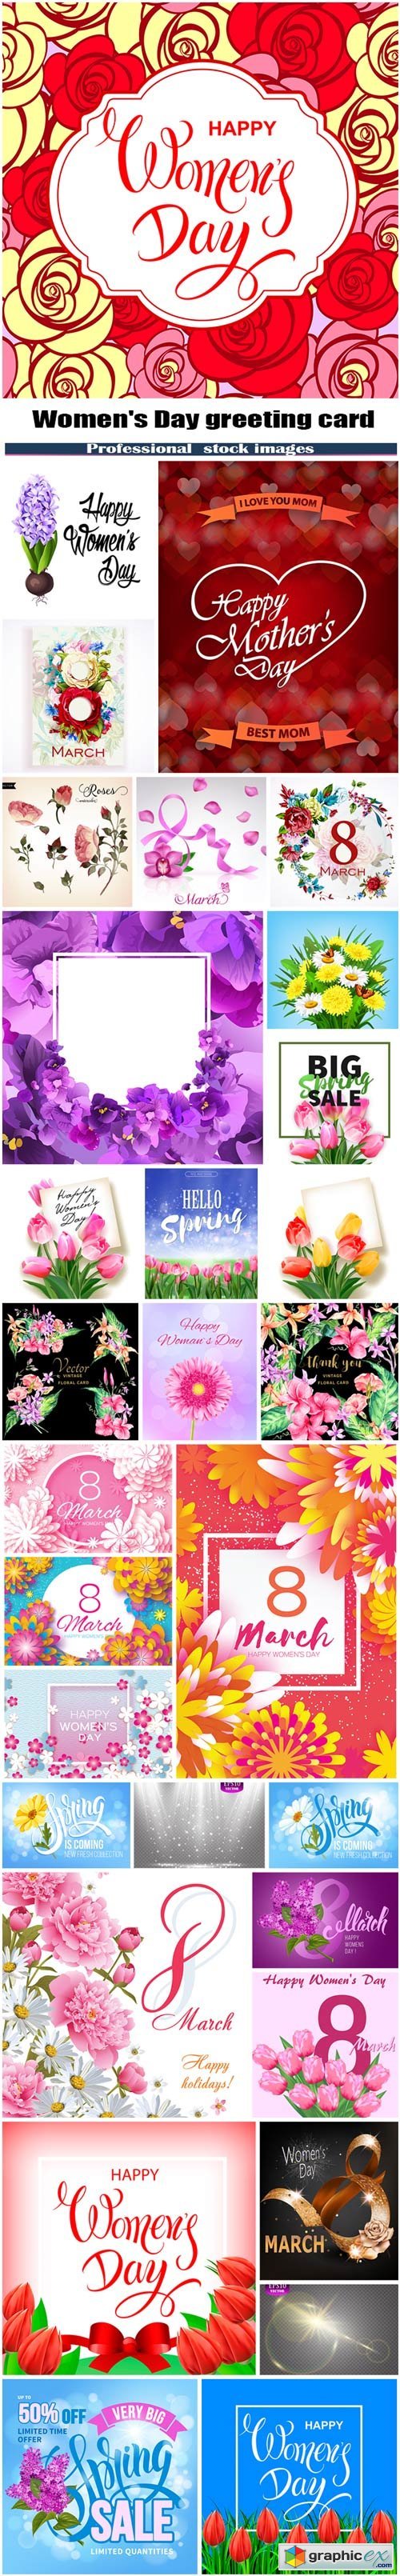 8 March Women's Day greeting card